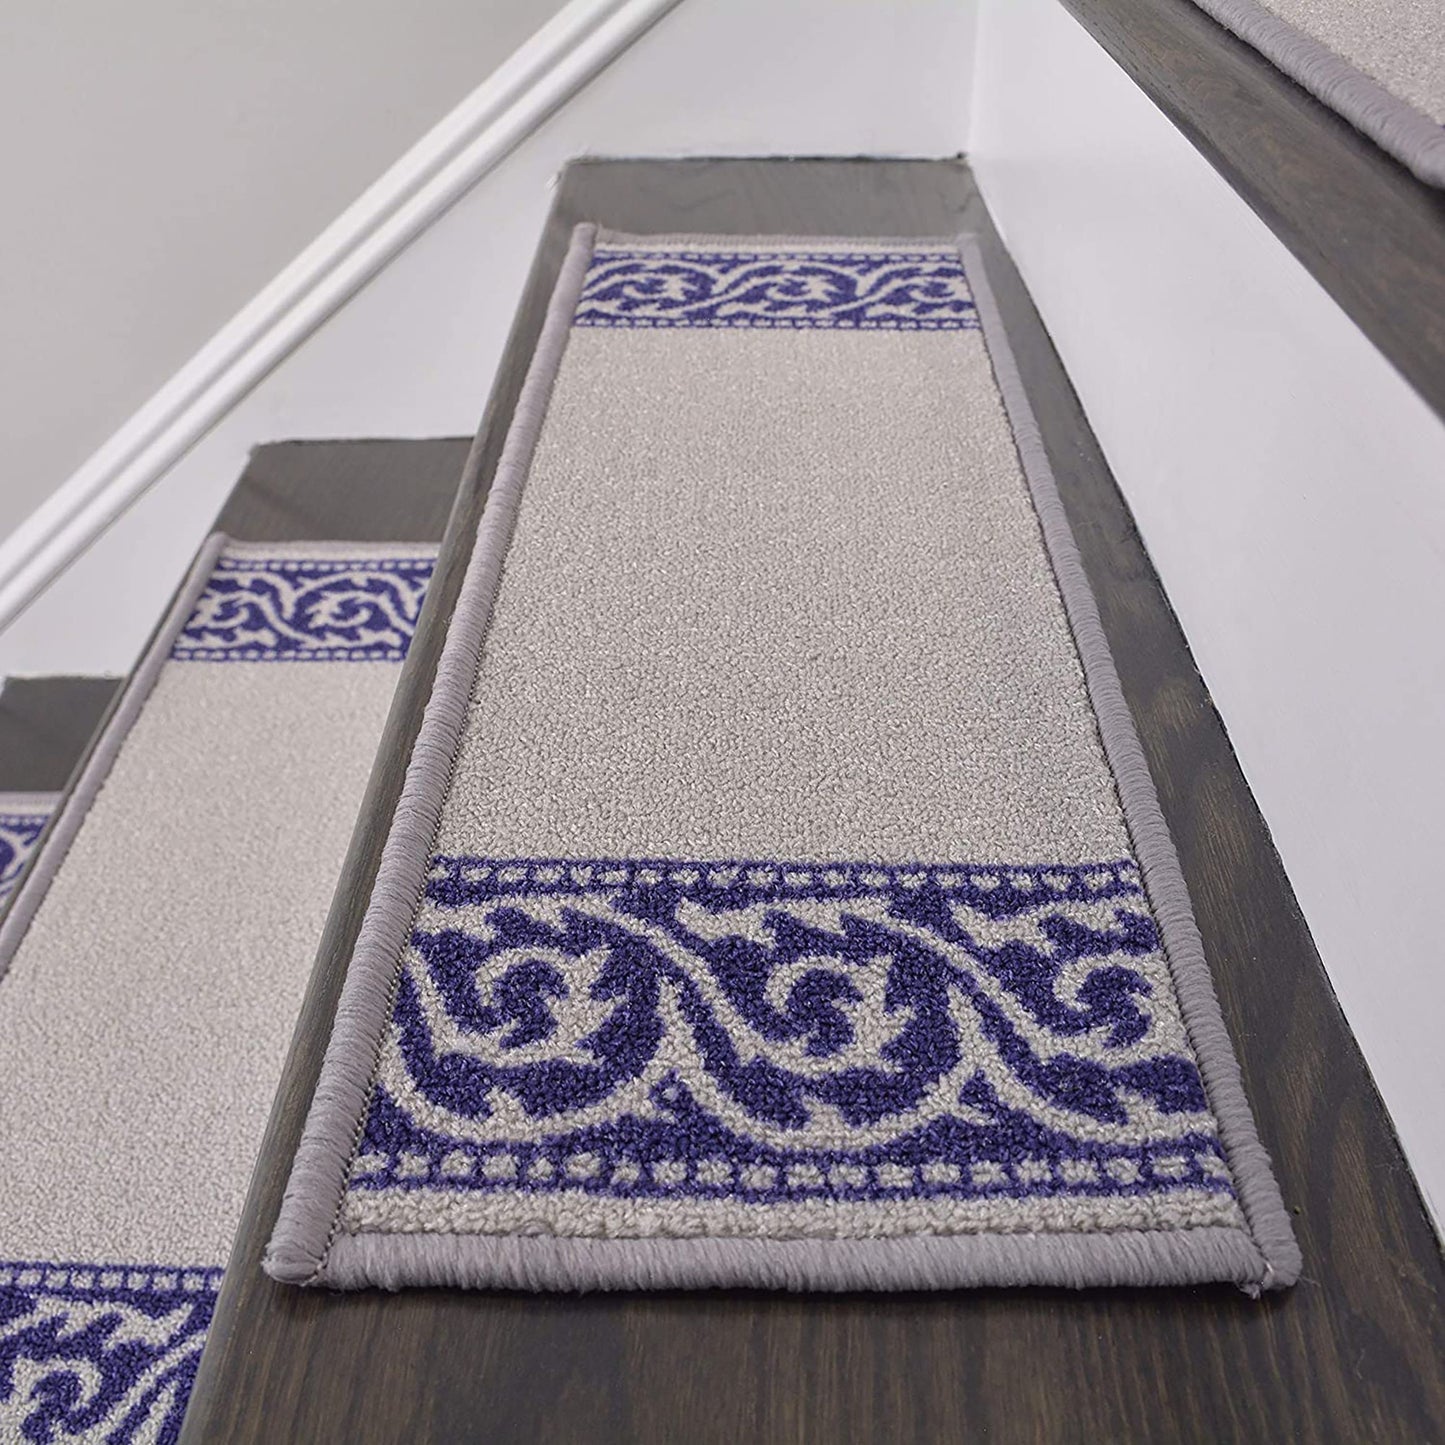 Machine Washable Stair Tread Floral Scroll Navy Bordered Grey Skid Resistant Latex Back Carpet Stair Treads Size 8.5" x 26" Many Set Options